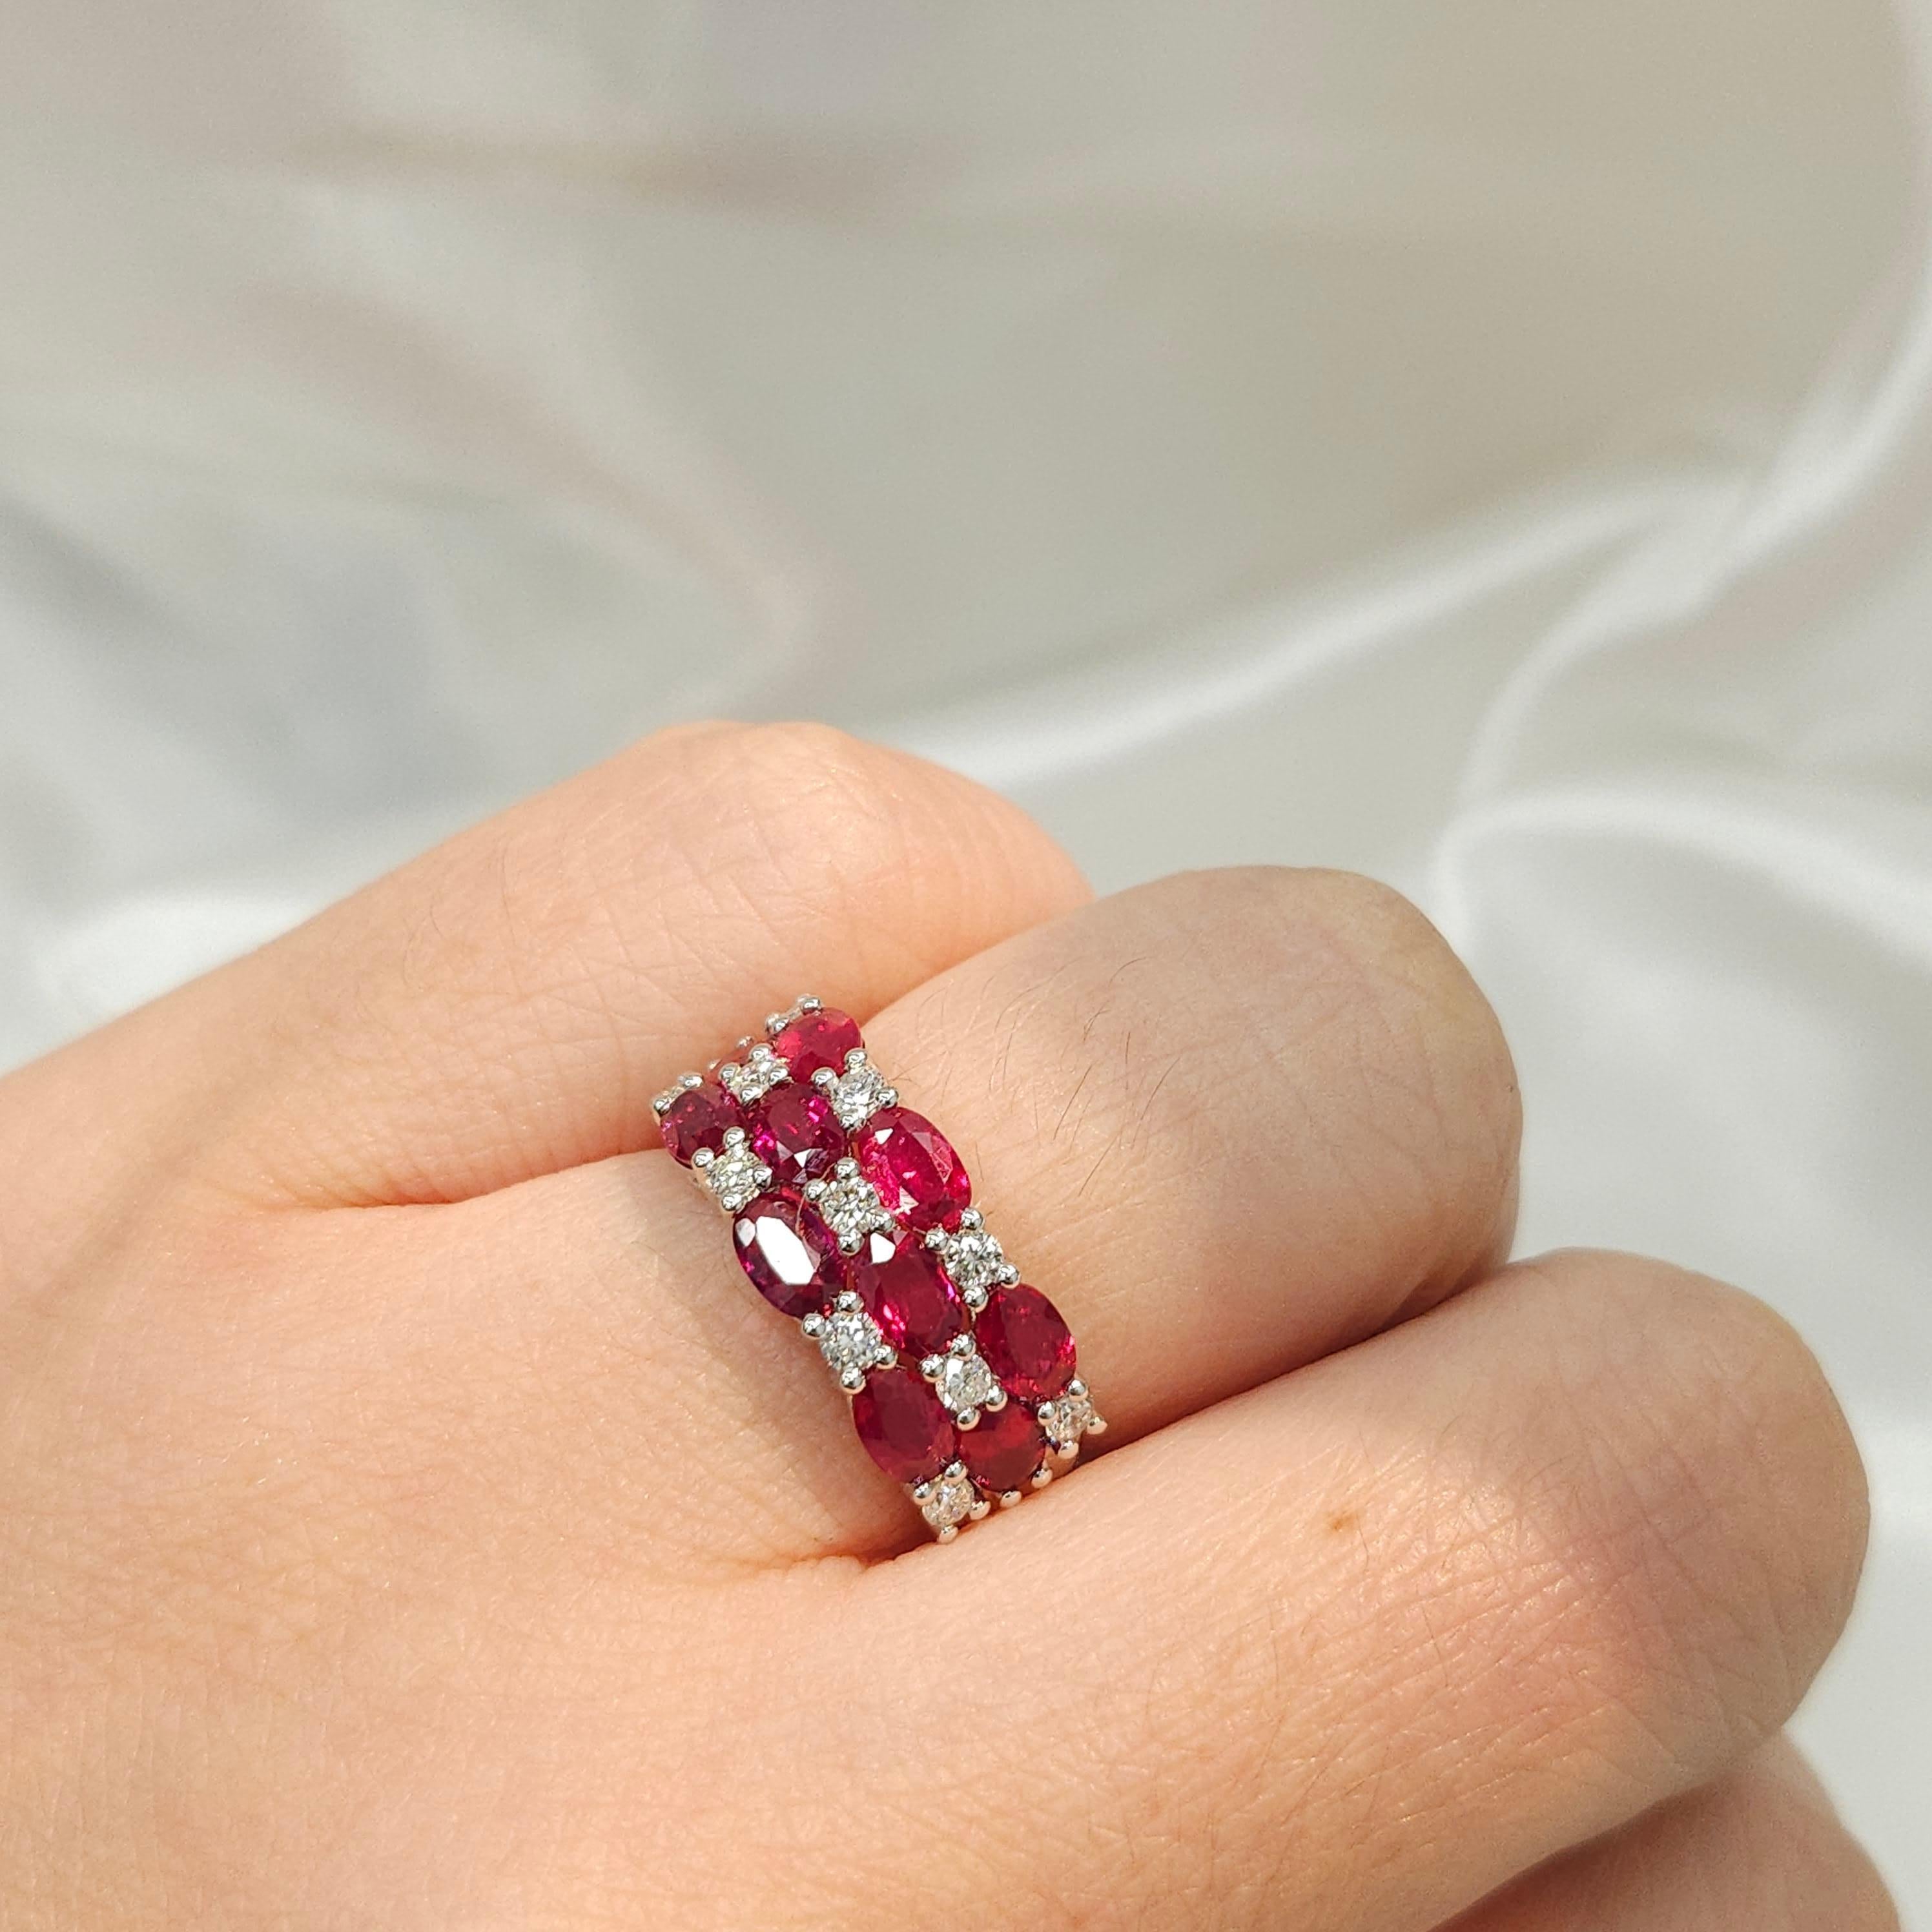 Immerse yourself in the radiant beauty of this extraordinary cocktail ring, adorned with a magnificent array of IGI Certified 2.66 Carat rubies and dazzling diamonds. Each of the 10 rubies, characterized by their intense purplish red color and long